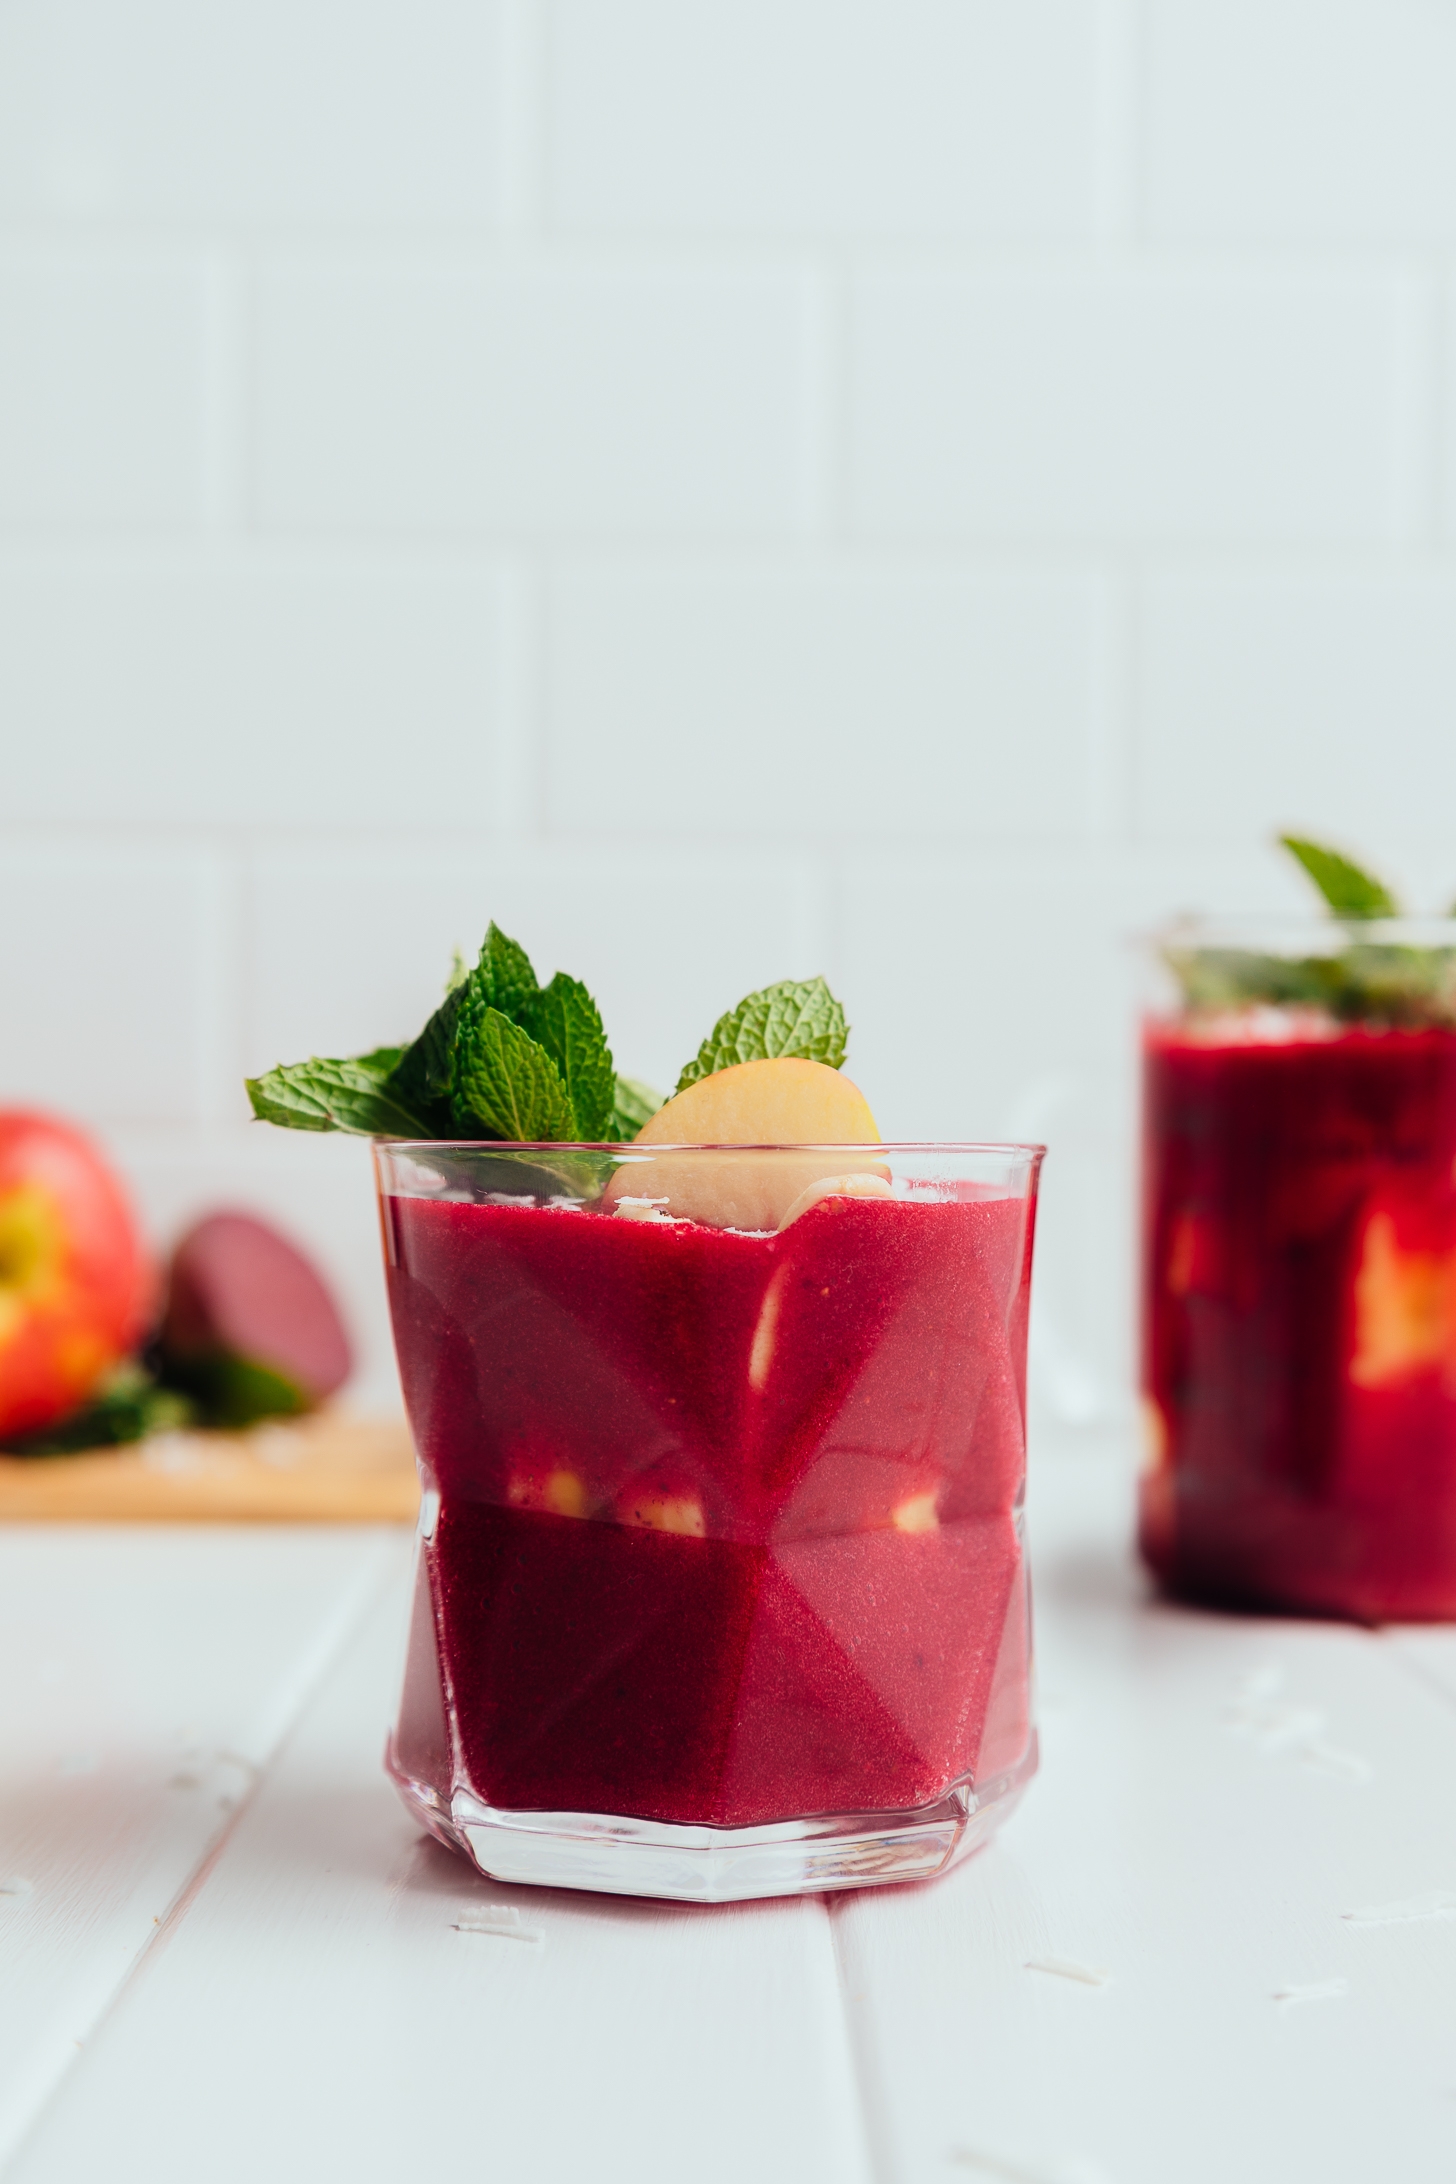 Glasses of our Beet and Berry Smoothie recipes topped with fresh mint leaves